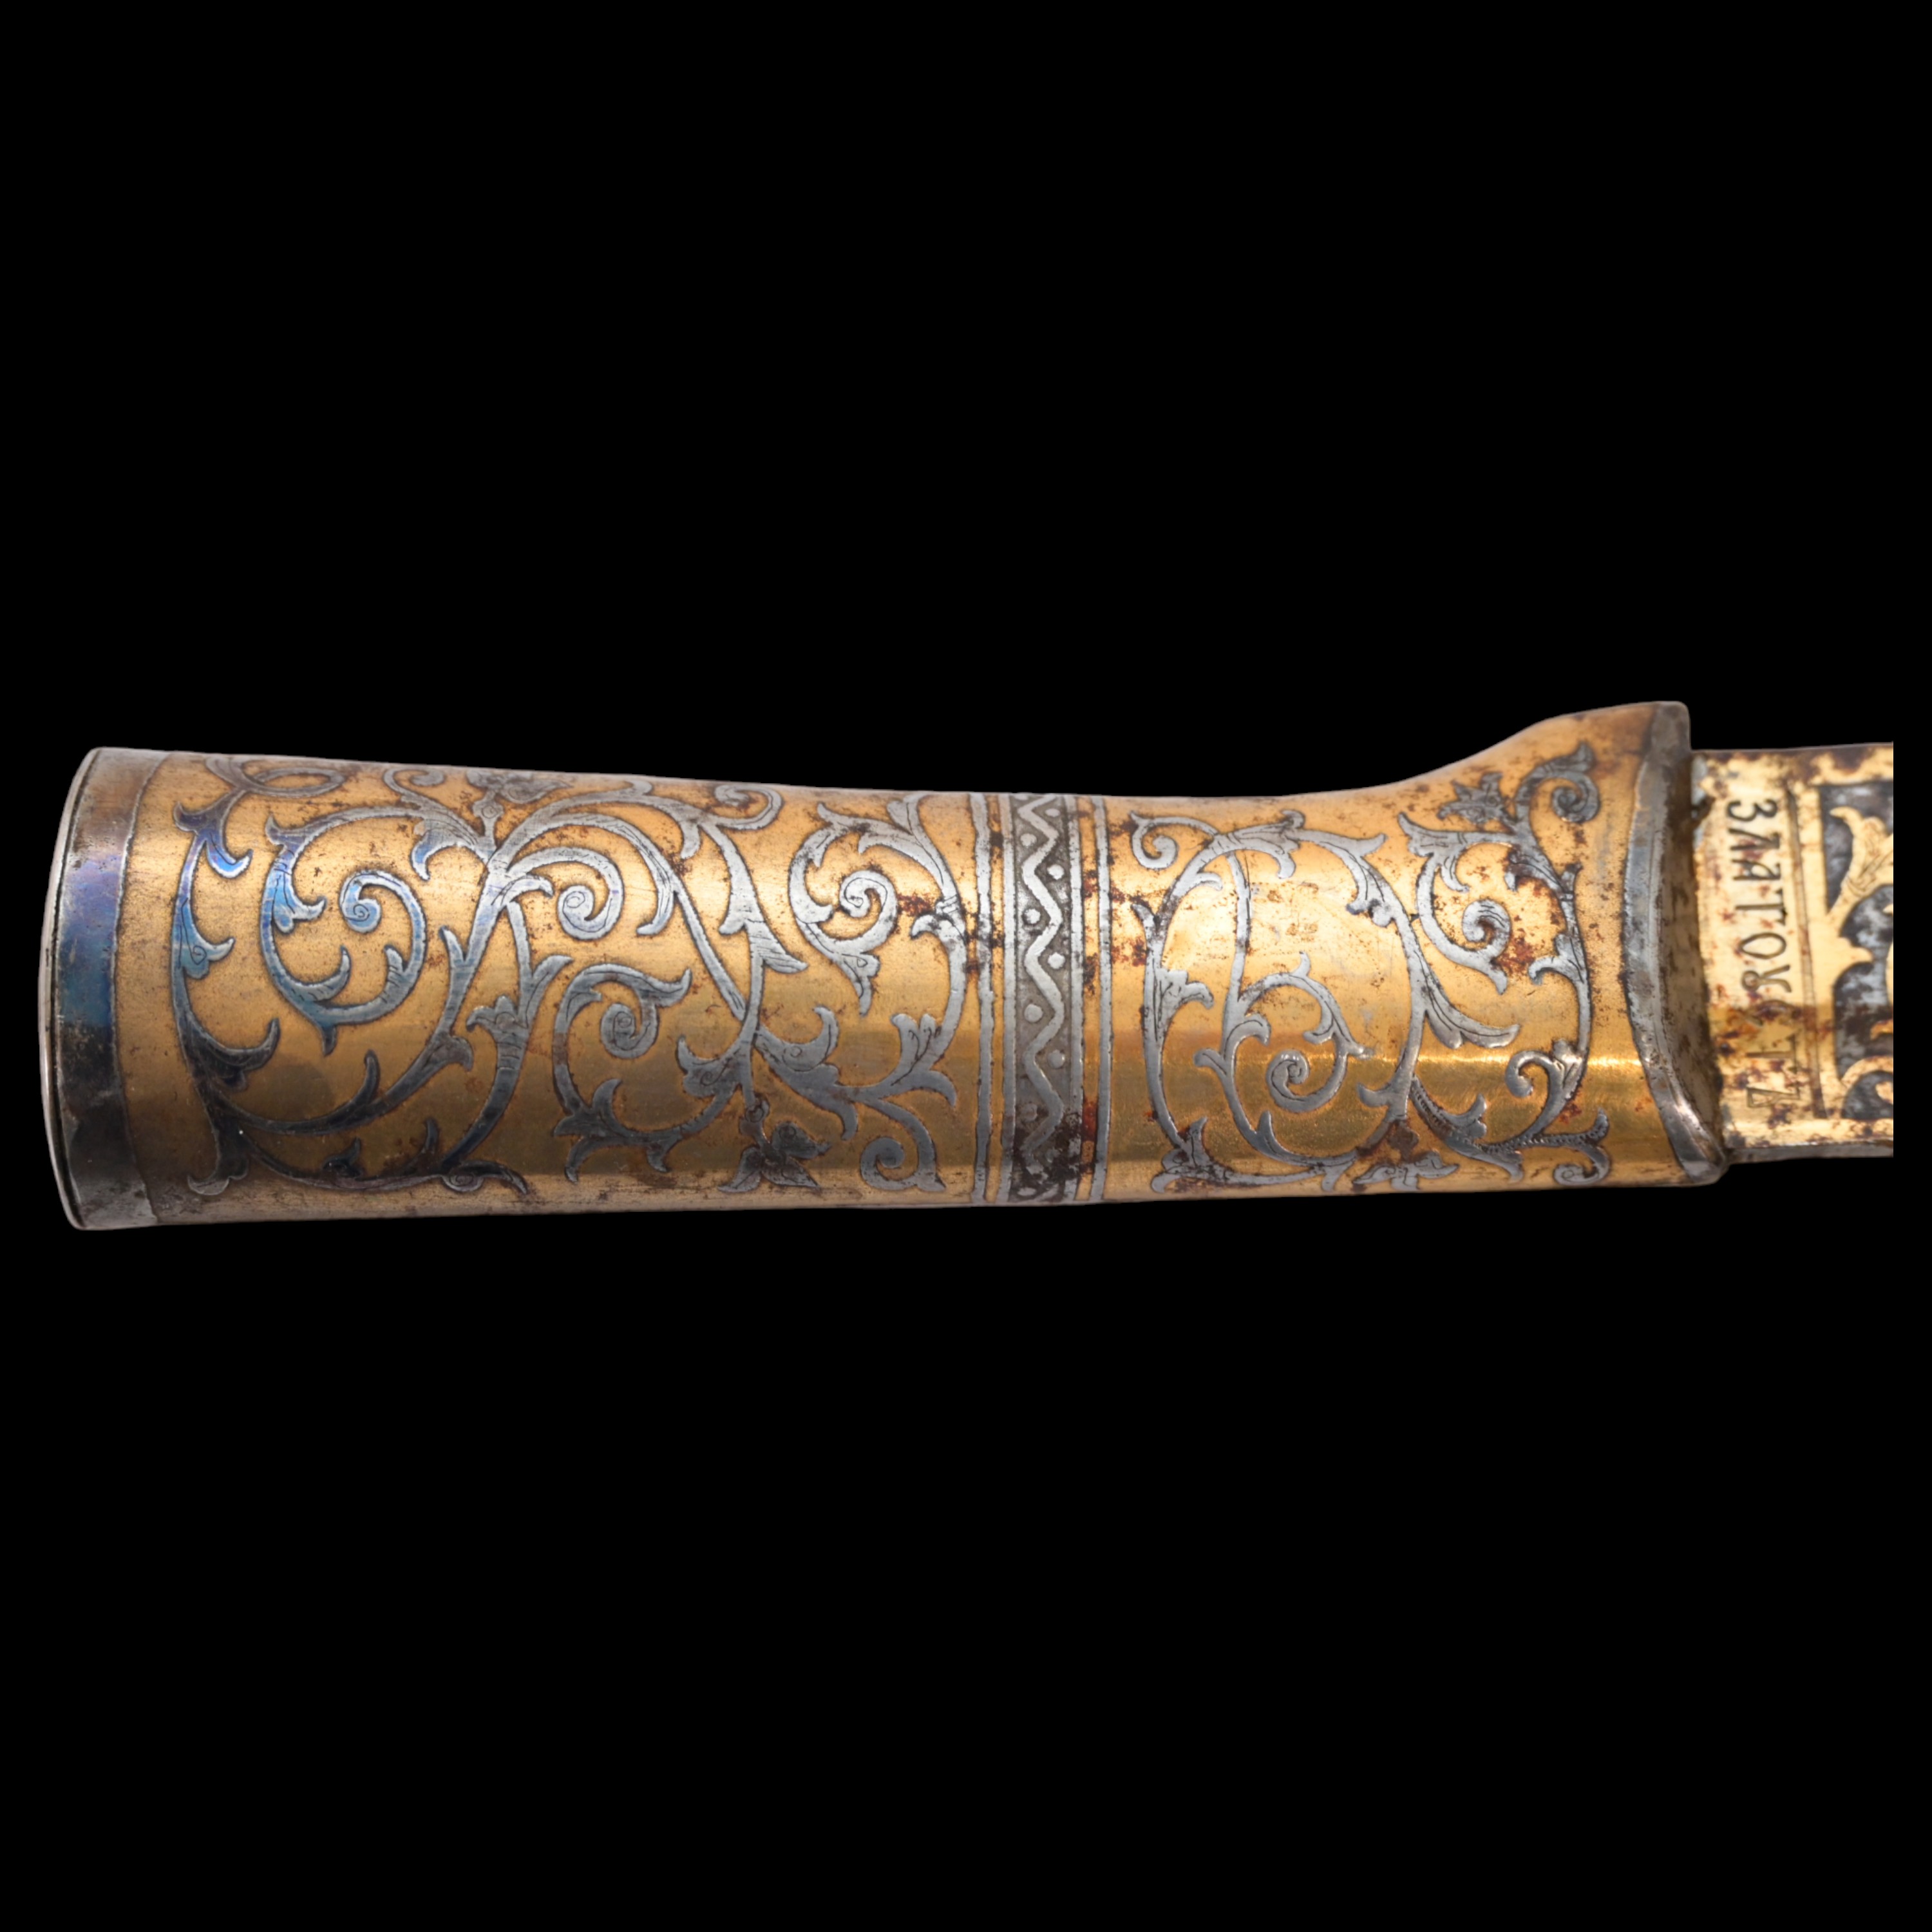 RARE HUNTING KNIFE, DECORATED WITH GOLD AND BLUE, RUSSIAN EMPIRE, ZLATOUST, 1889. - Image 23 of 26